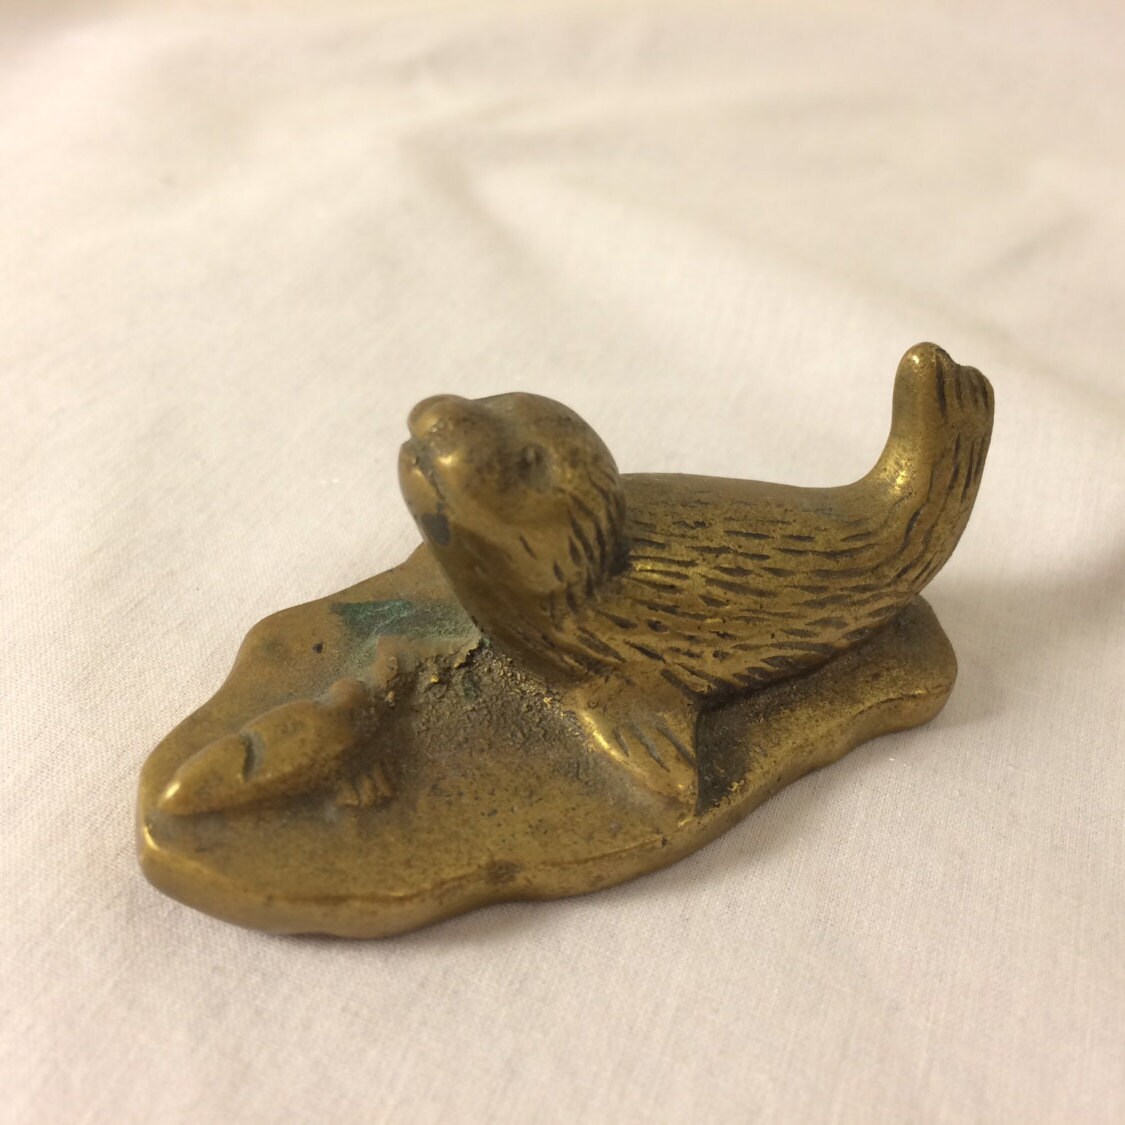 Small Brass Seal With Fish Figurine | Etsy